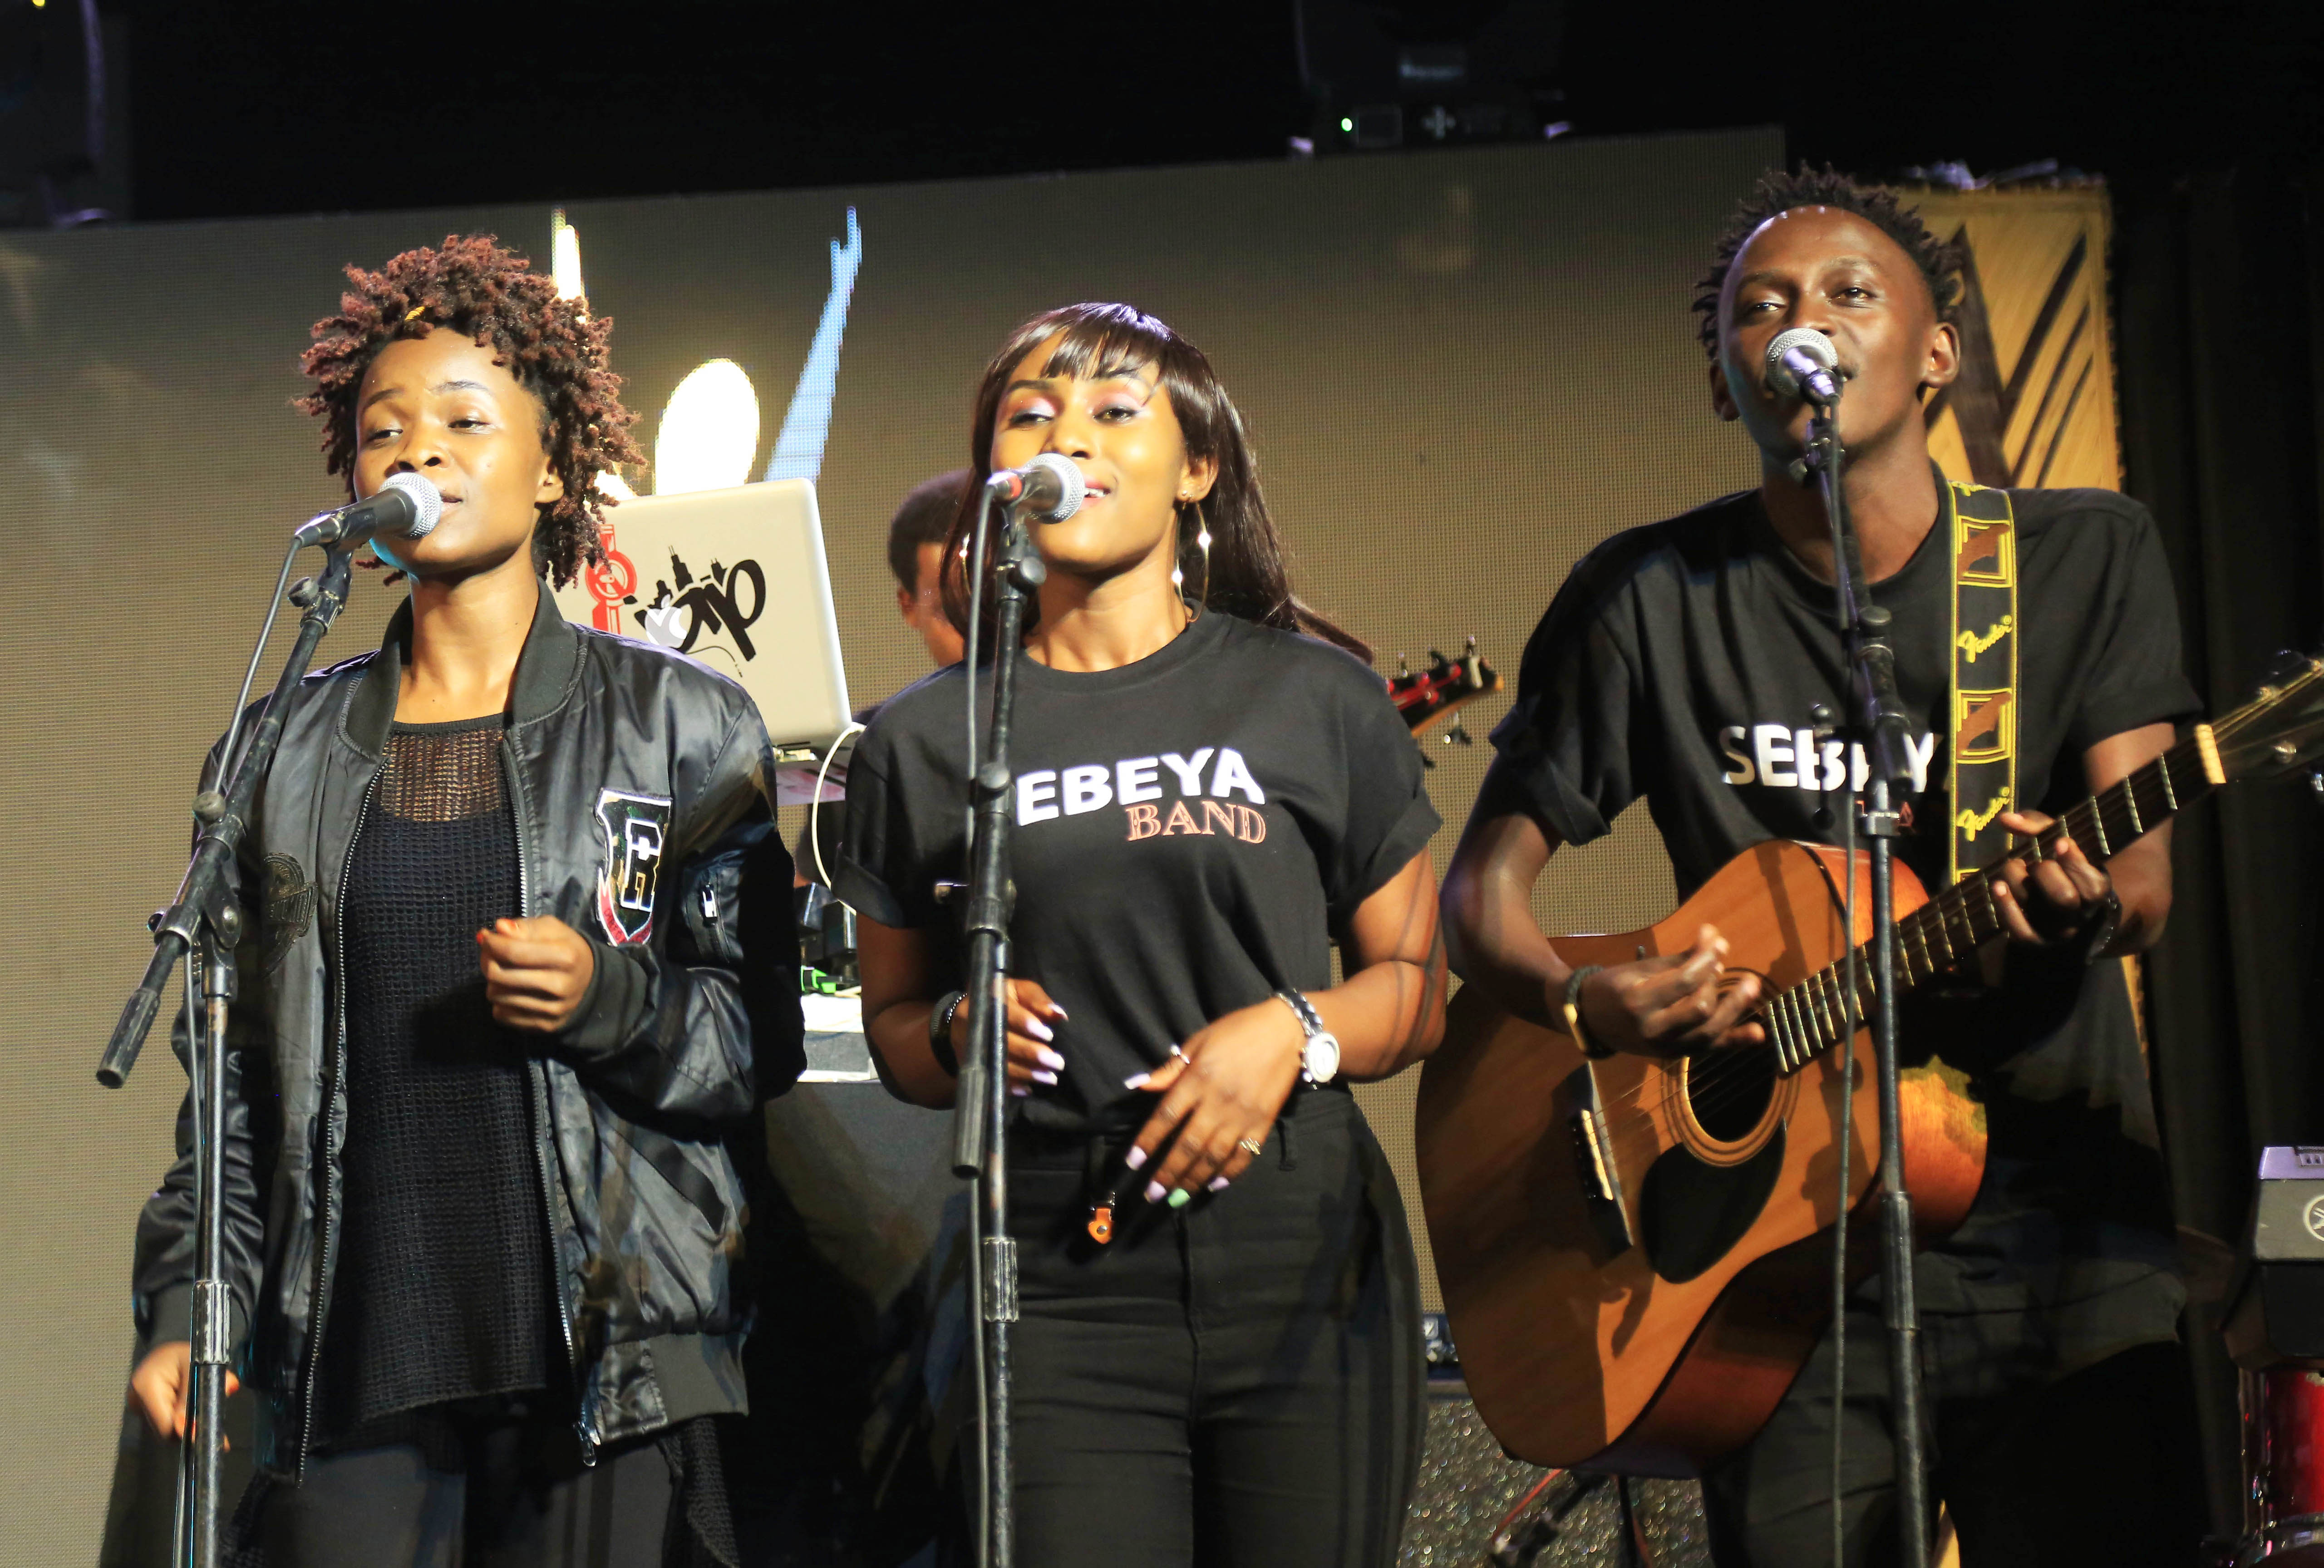 Sebeya band during a live band performance in Kigali. Live bands have been suspended as the government tightens Covid-19 guidelines. 